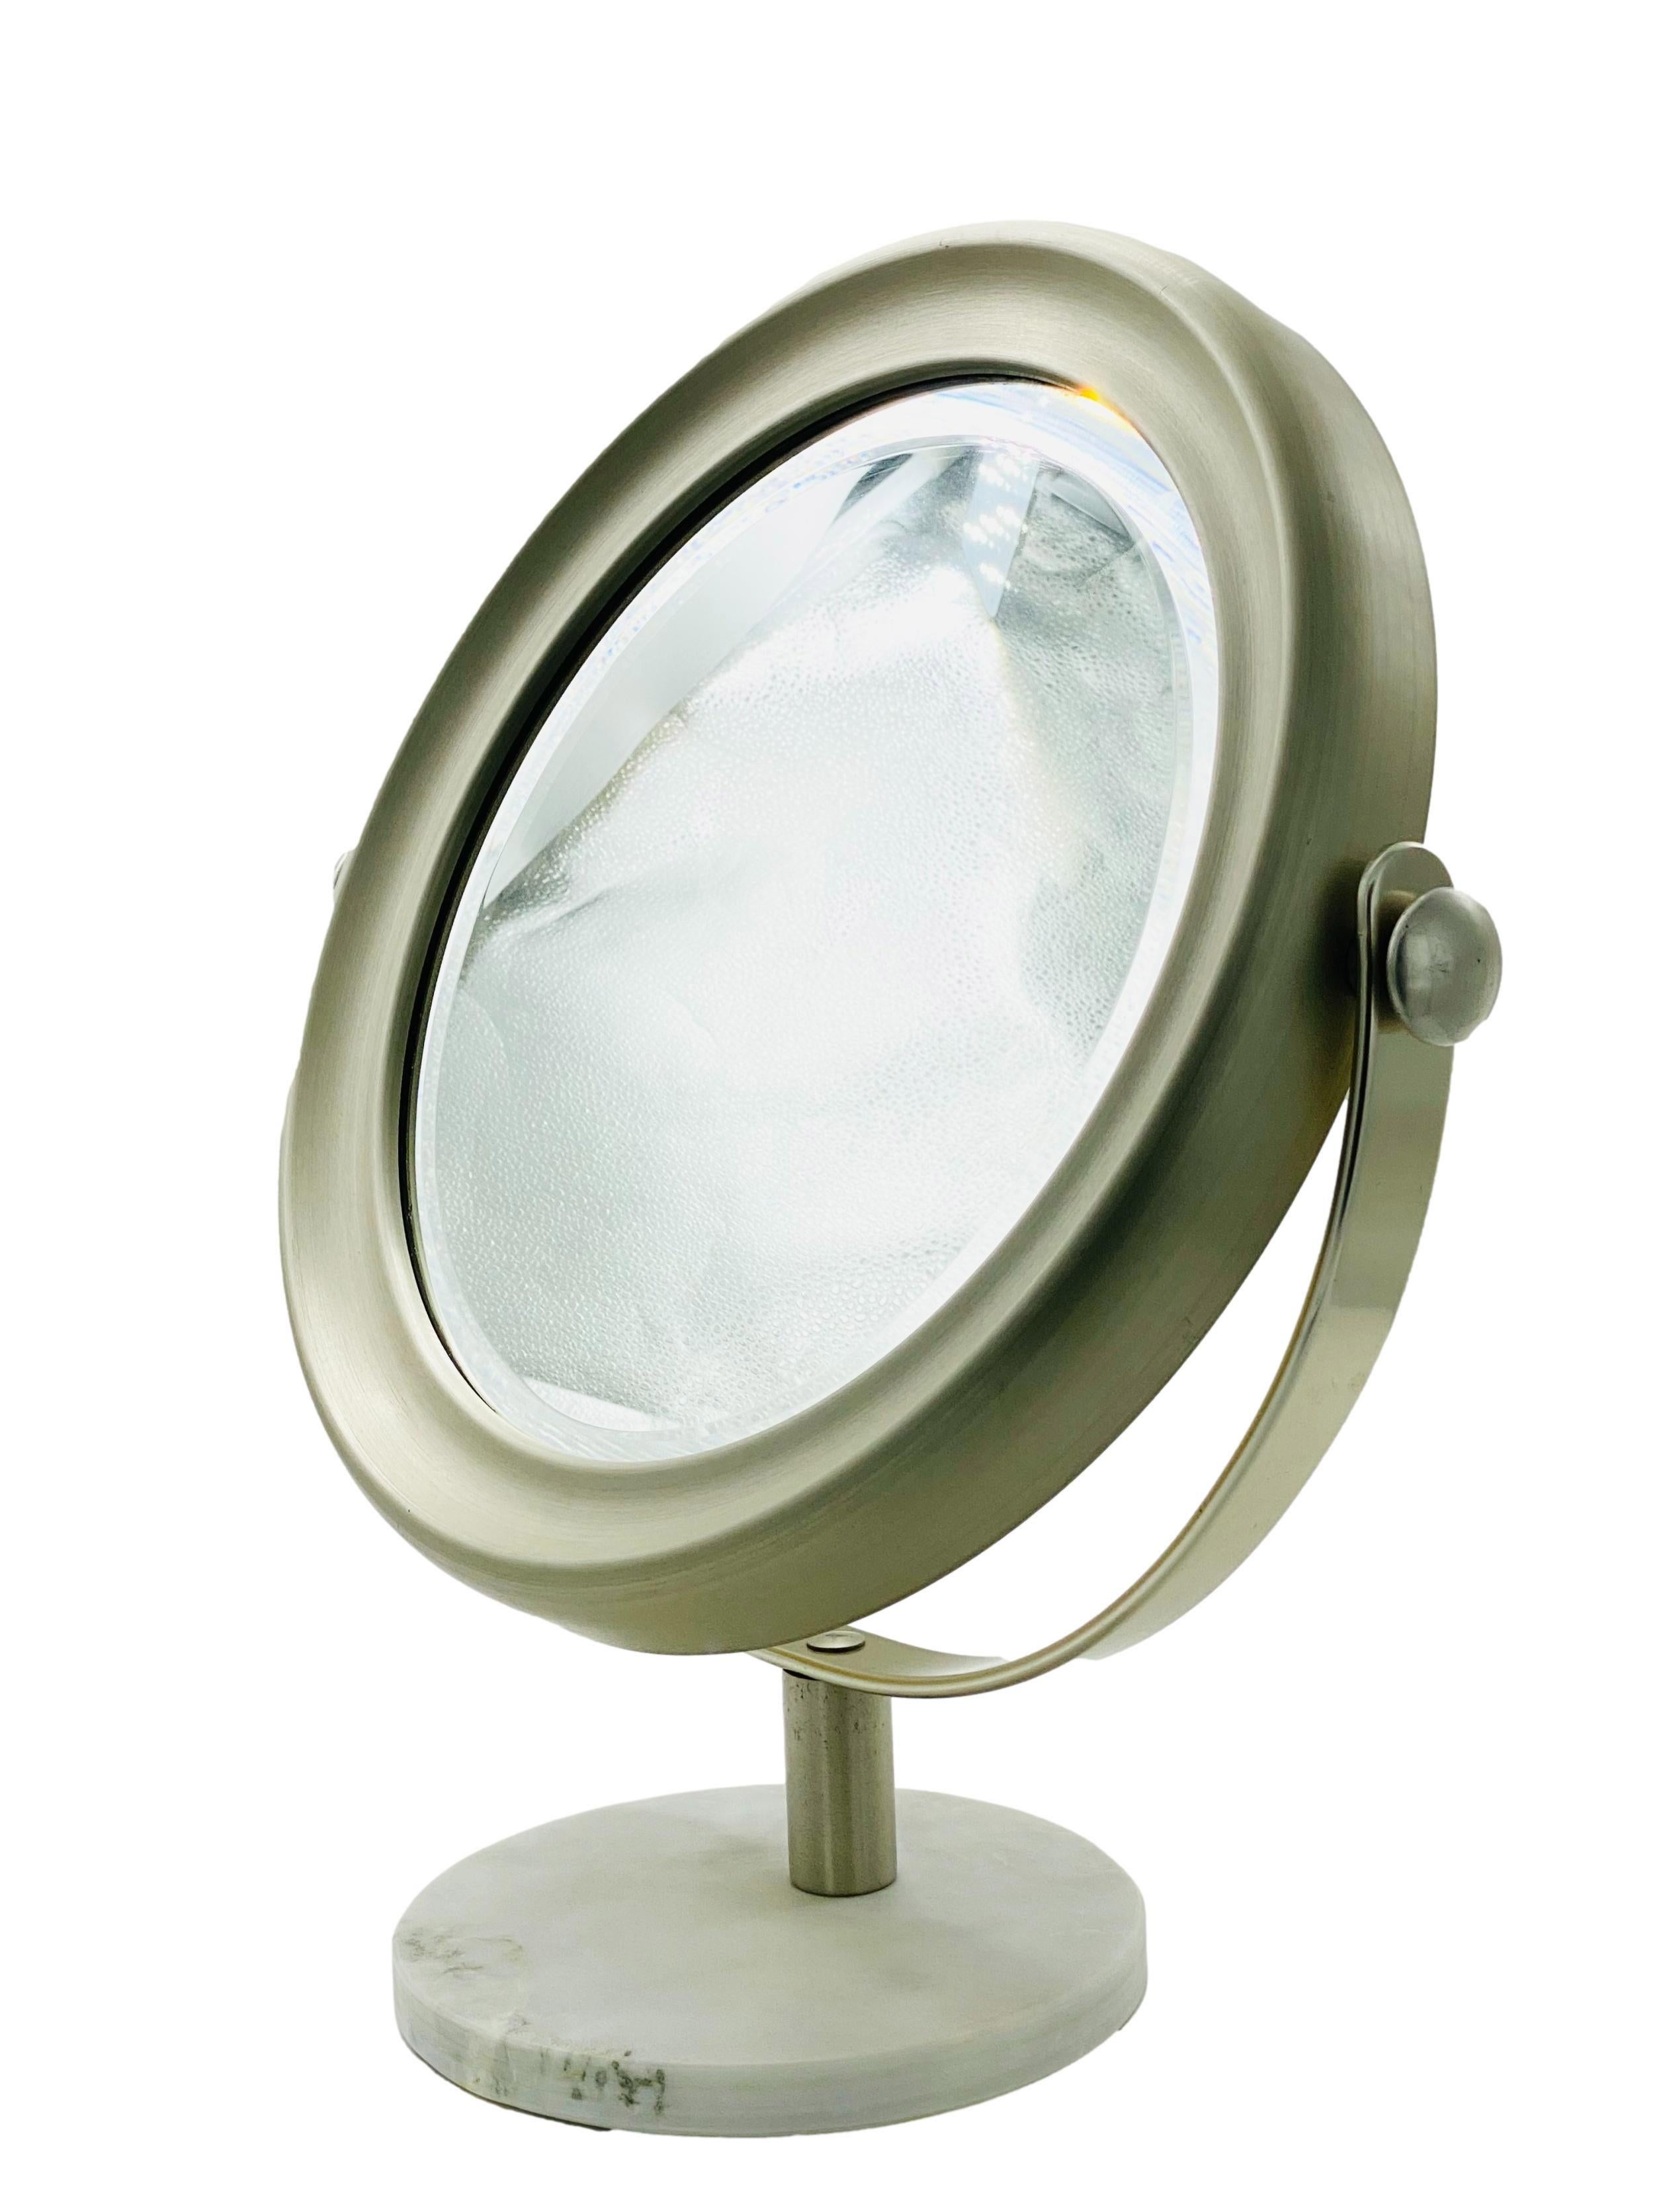 Table mirror Mod. Narciso designed by Sergio Mazza for Artemide, Italy 1976 with white marble and nickel-plated brass base.